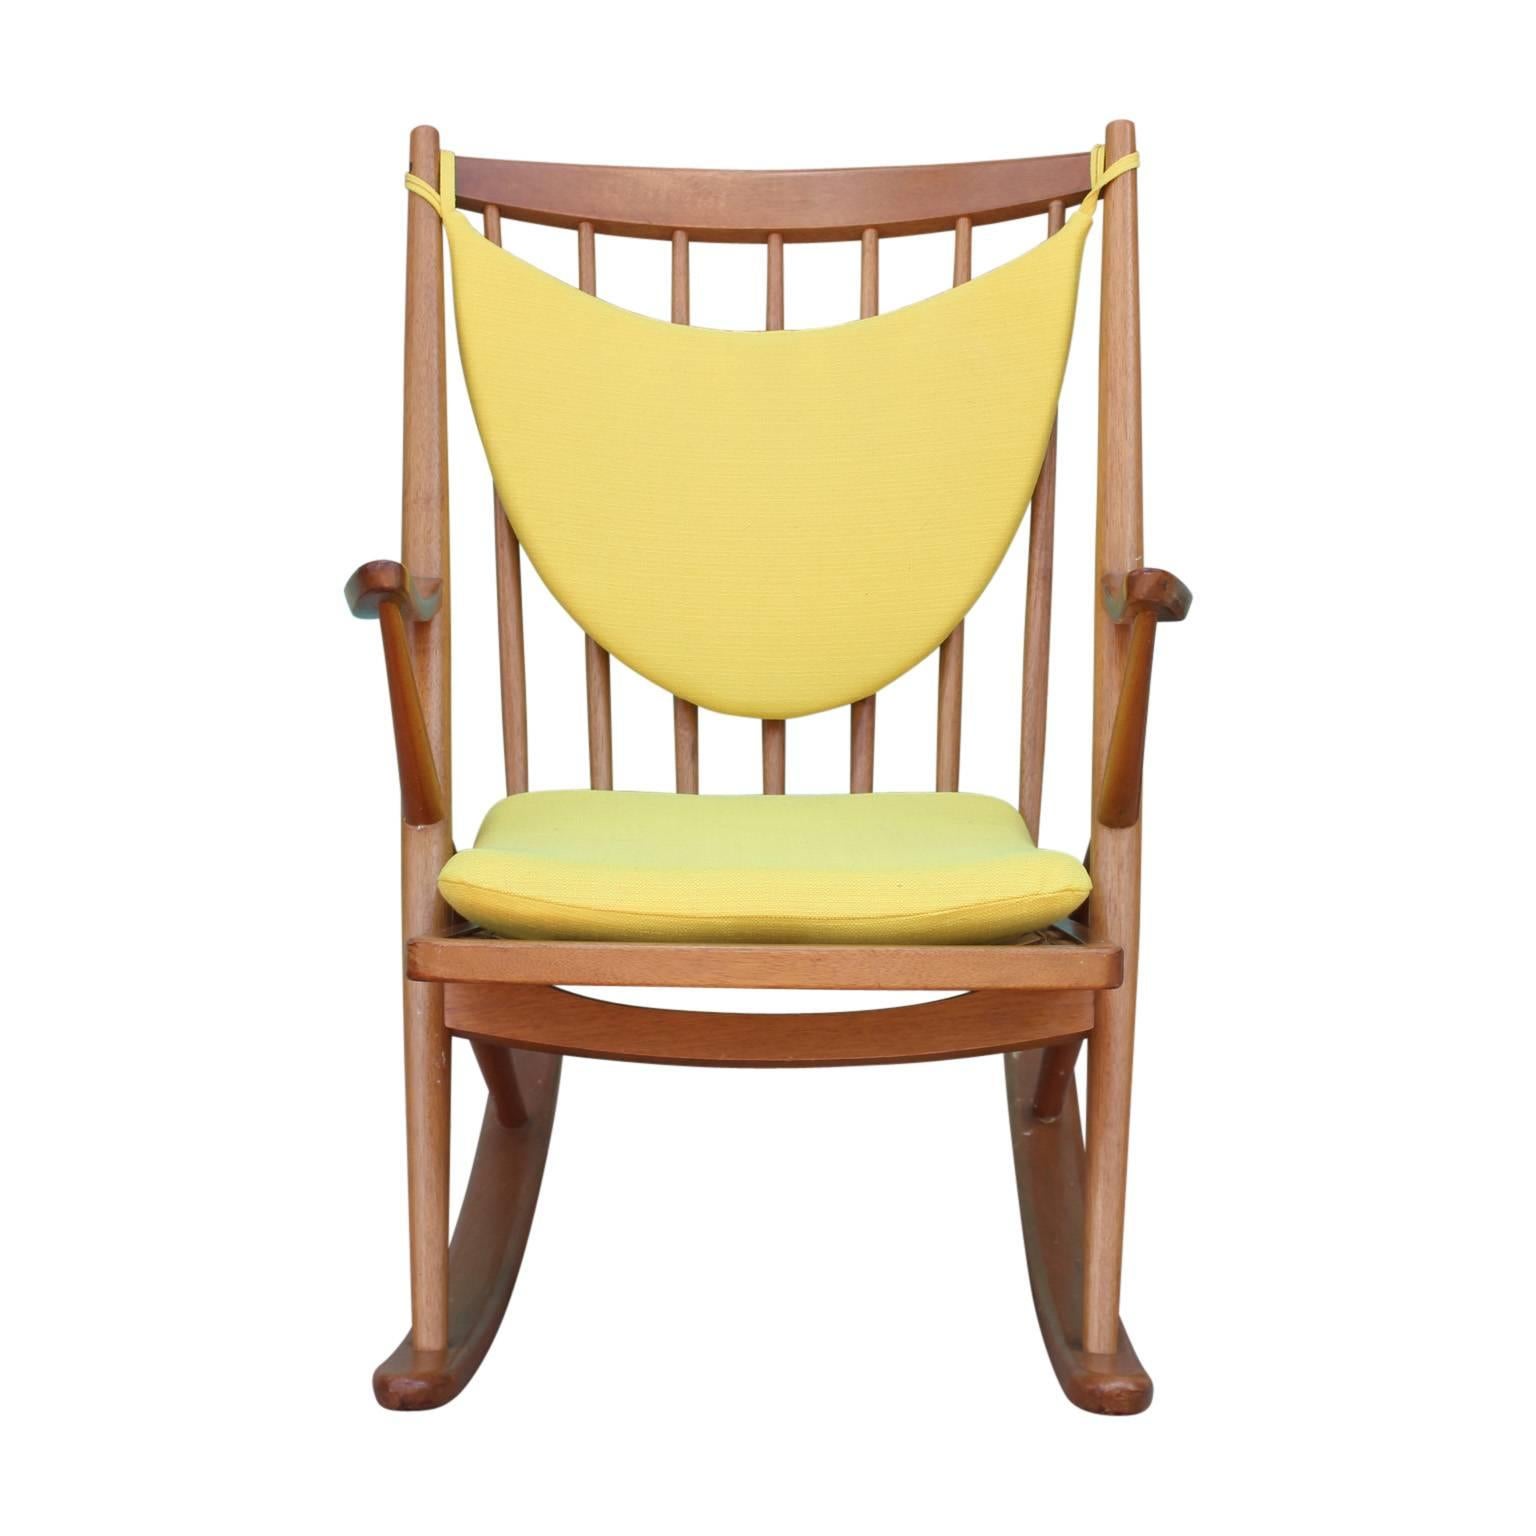 Beautiful vintage modern rocking chair with an 